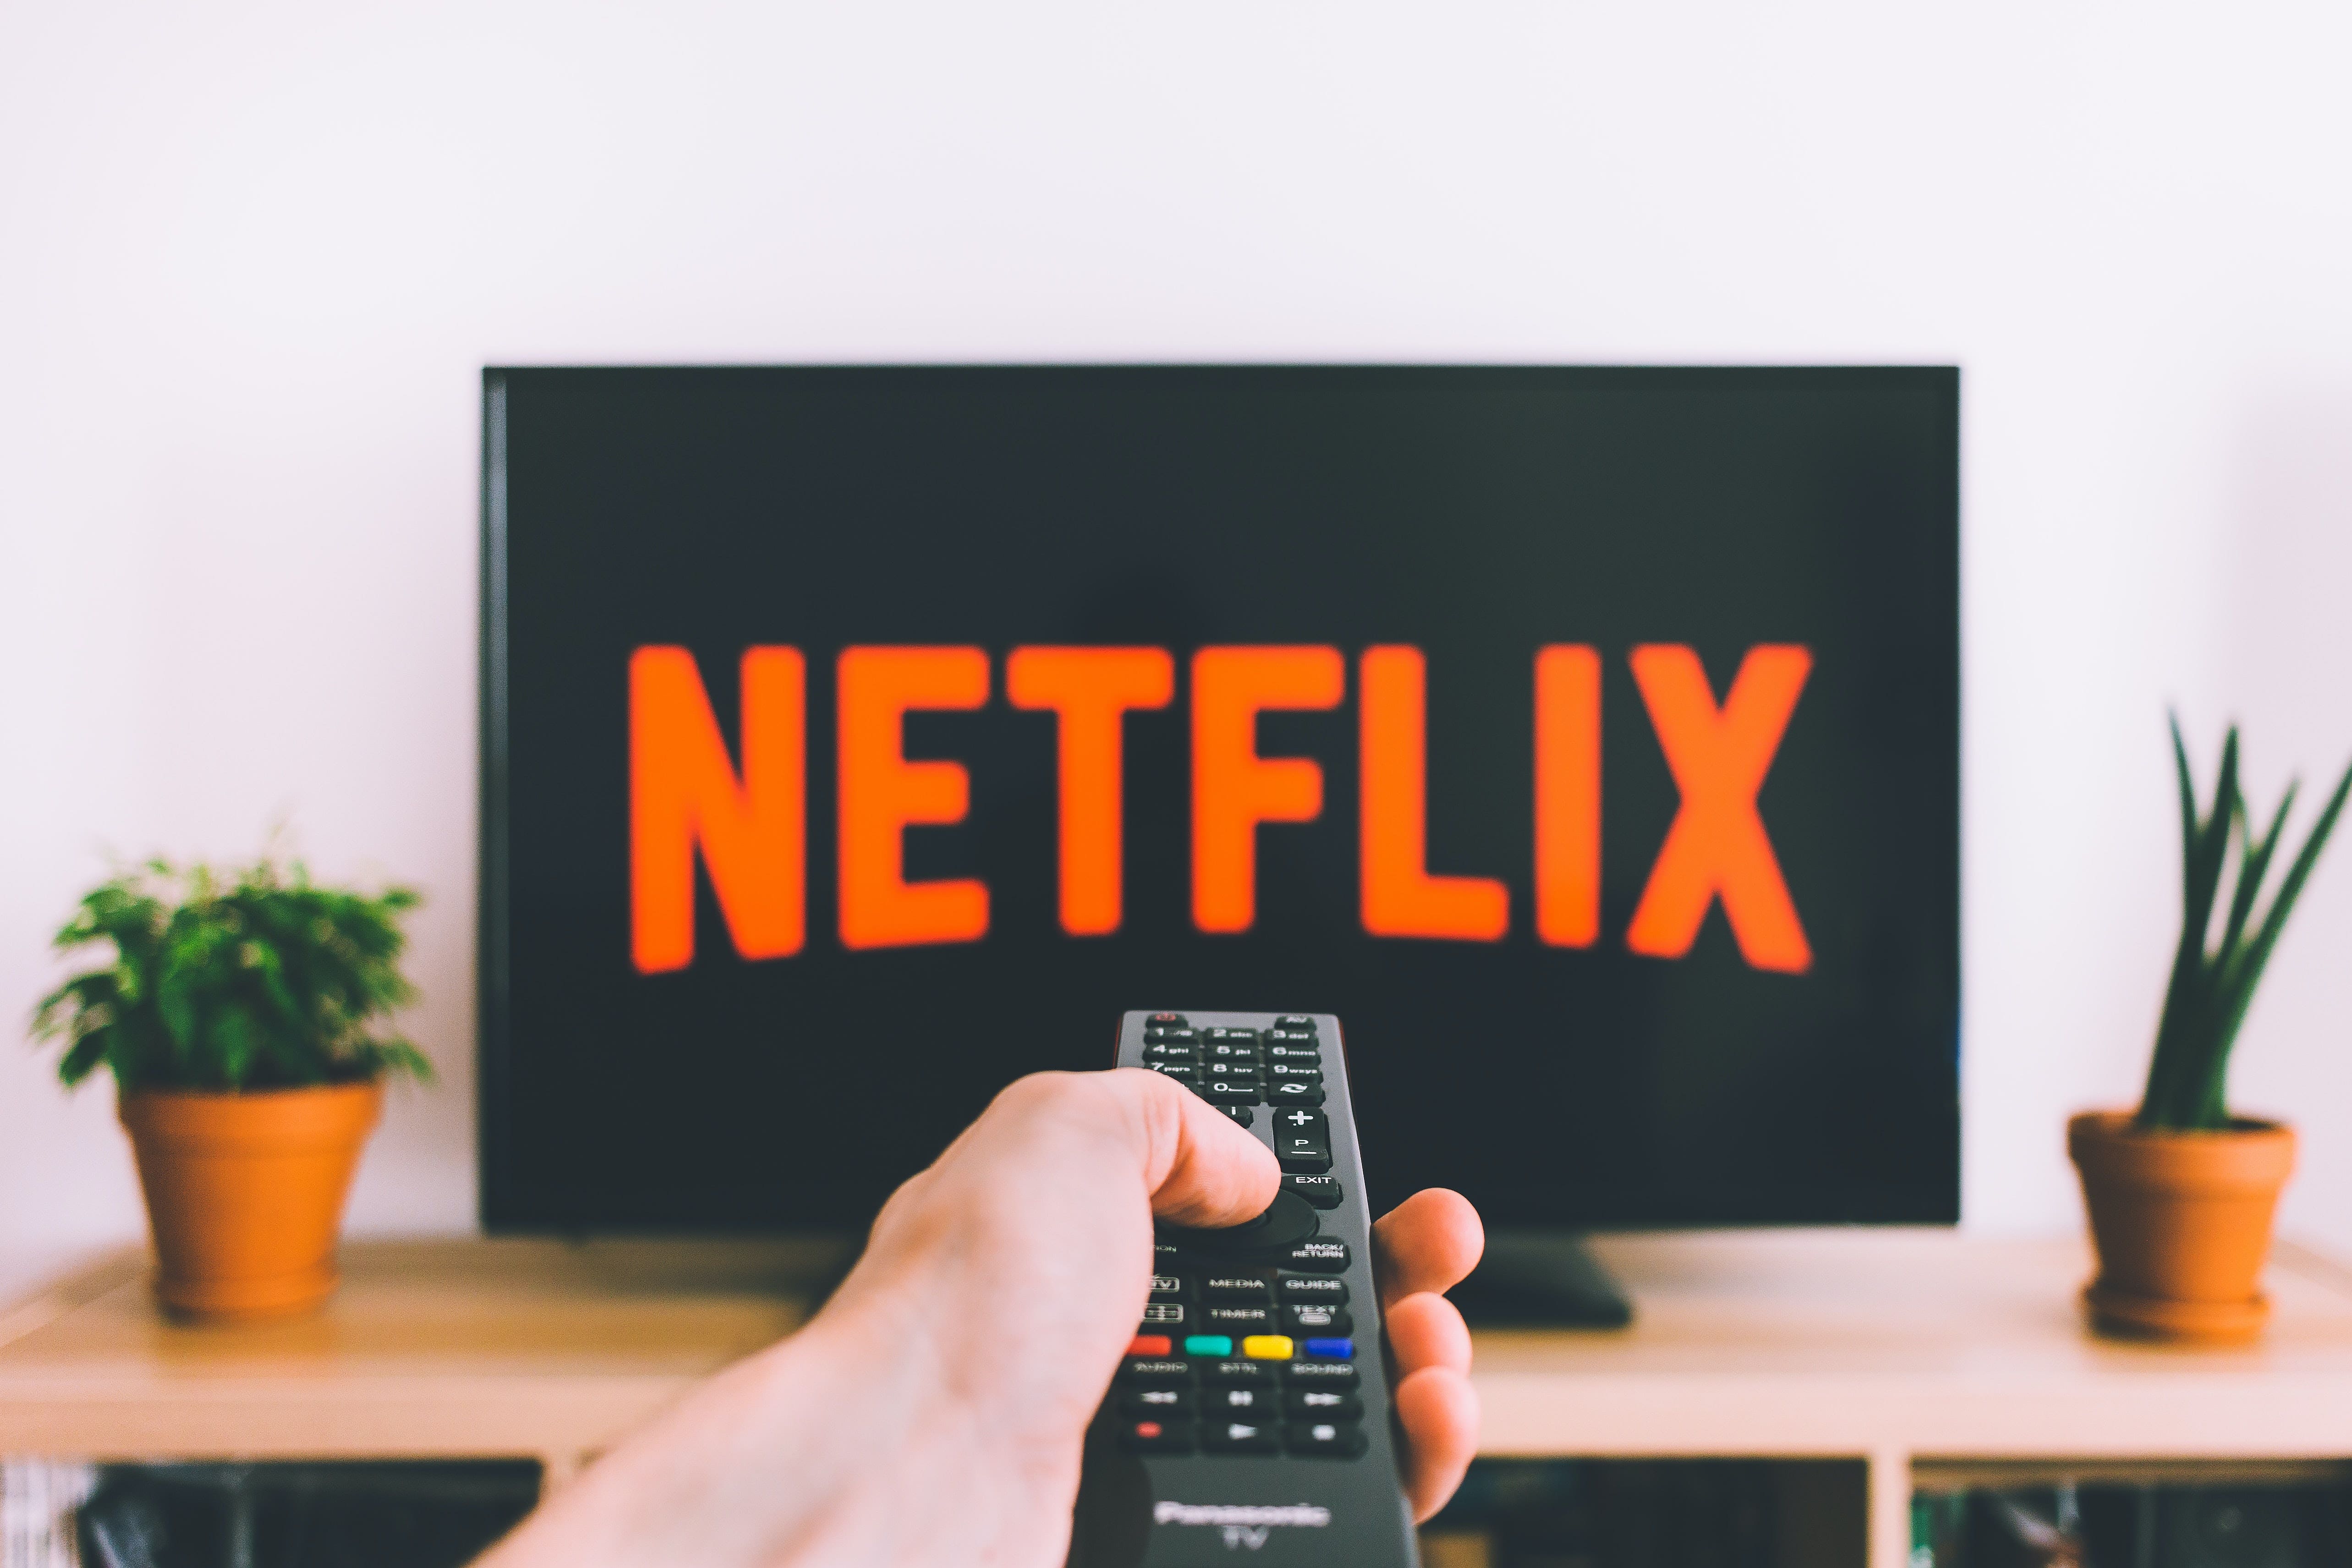 Can Netflix Return To Mid-To-High Teens Revenue Growth? These 2 Tests Will Tell Us